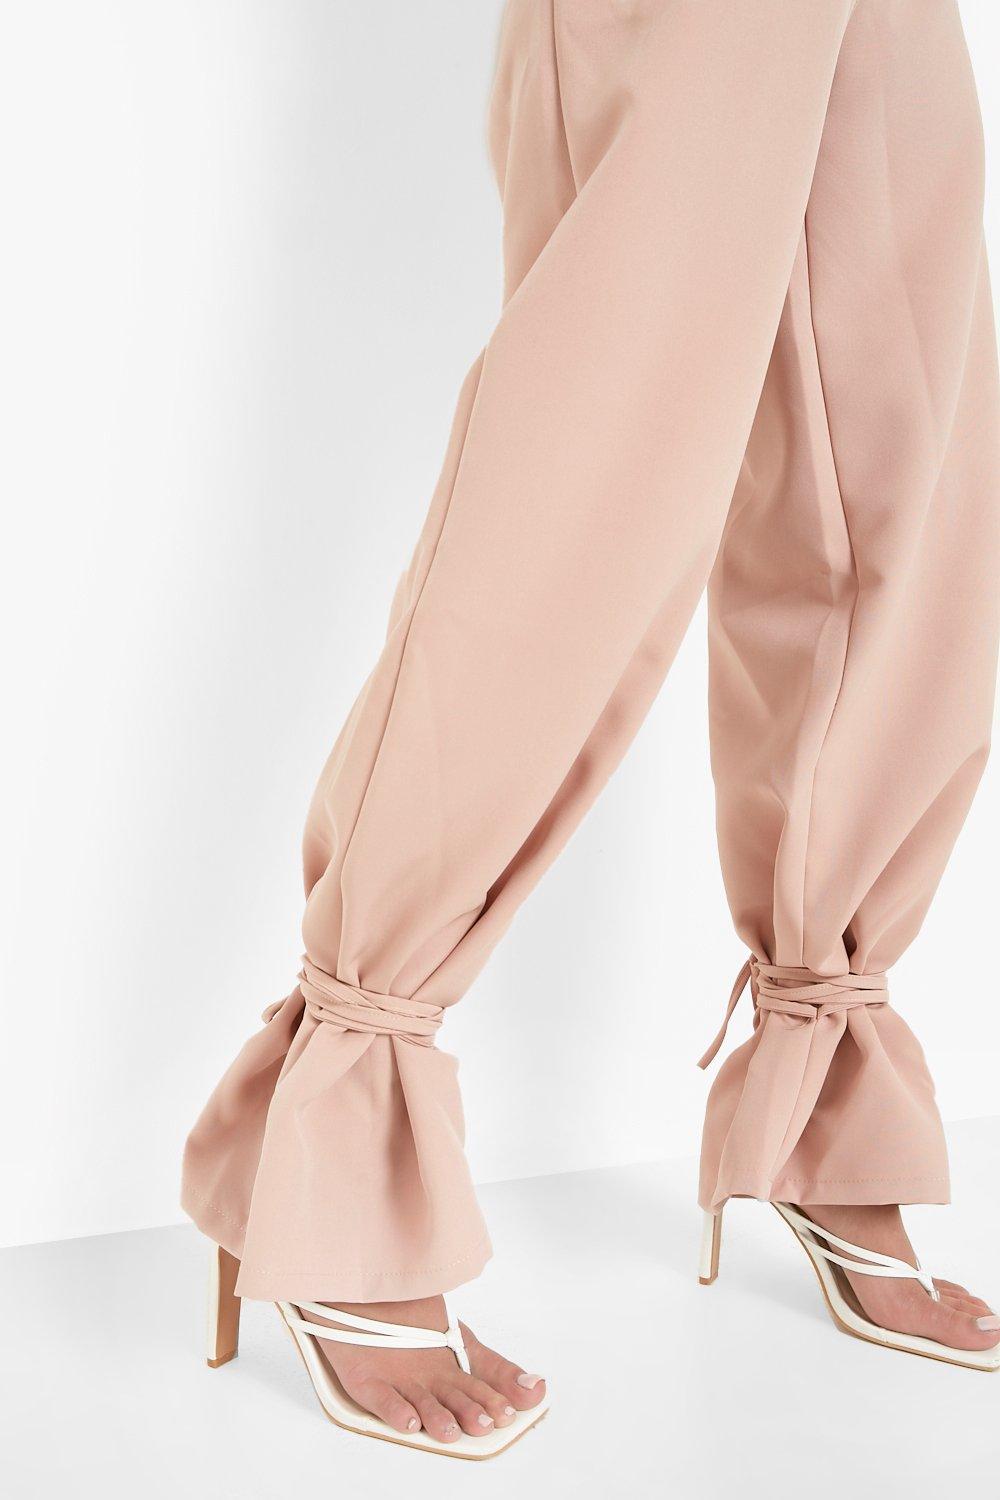 Ankle Tie Pants -  Canada